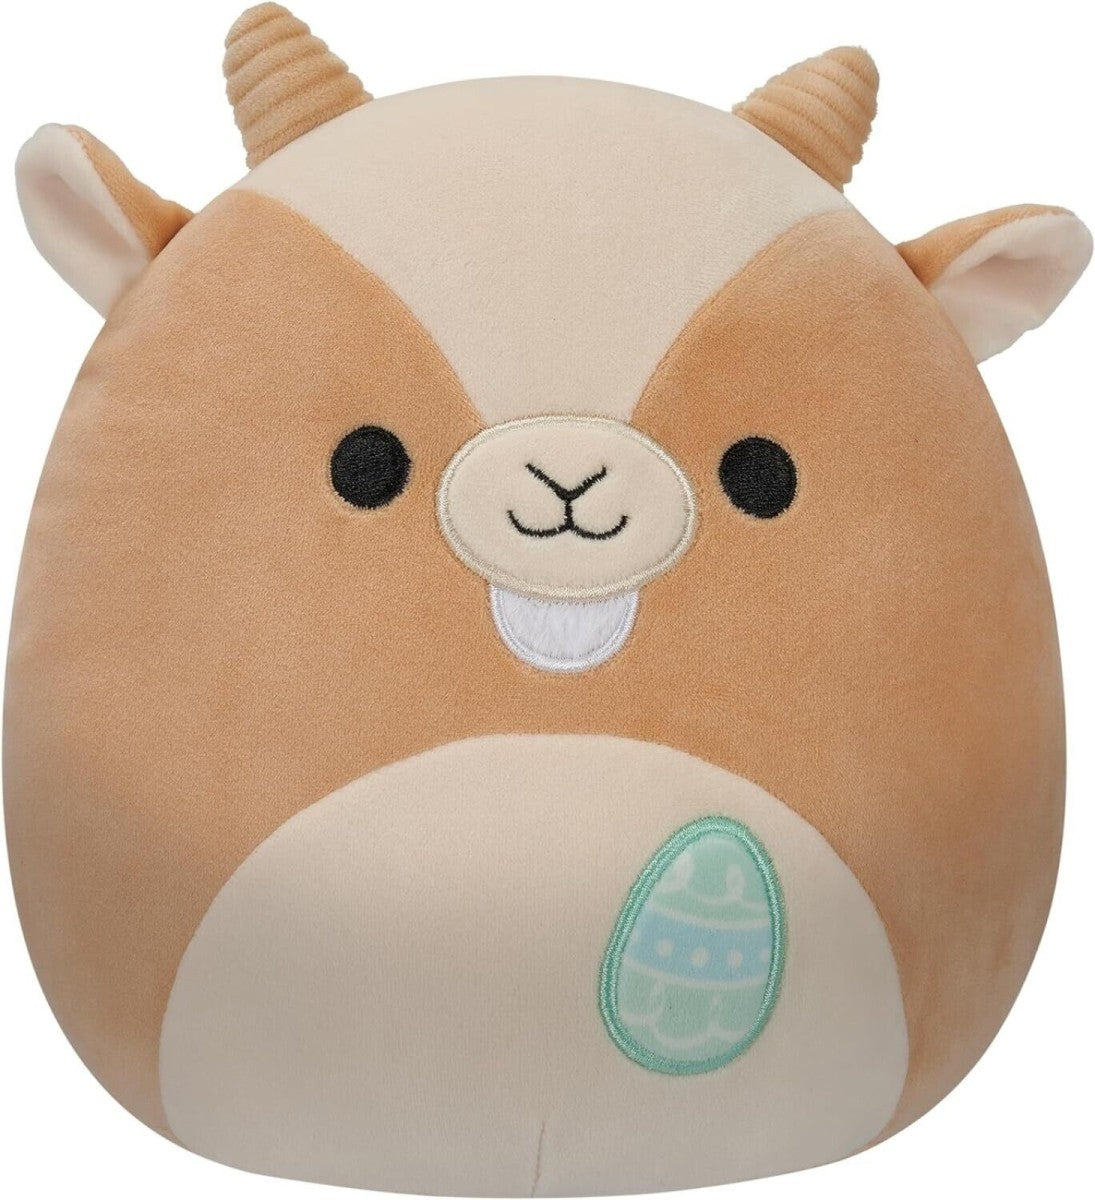 Squishmallows 7.5" Easter Plush Toy - Grant